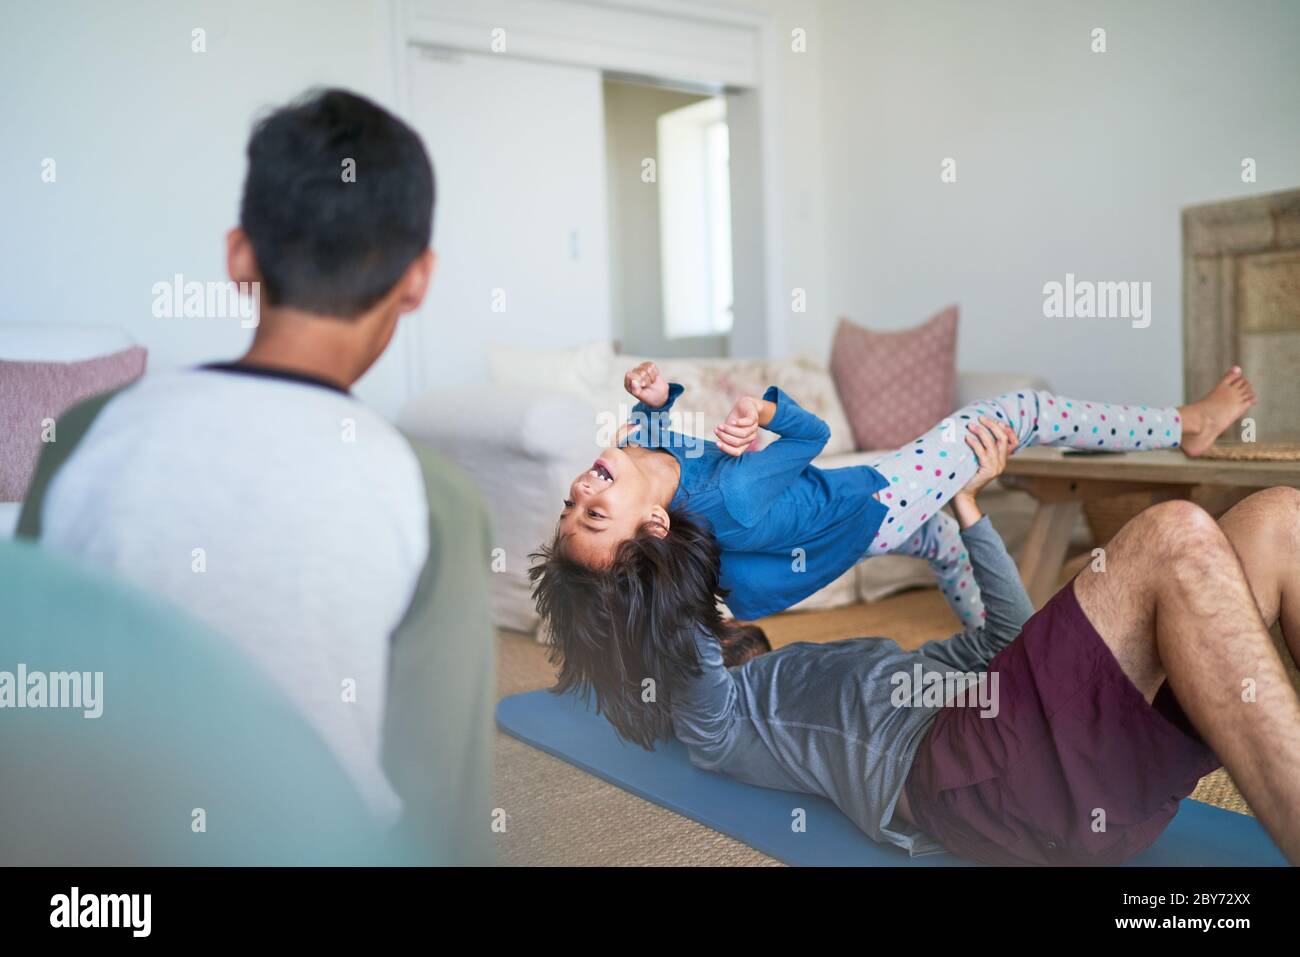 Playful father lifting daughter and exercising in living room Stock Photo